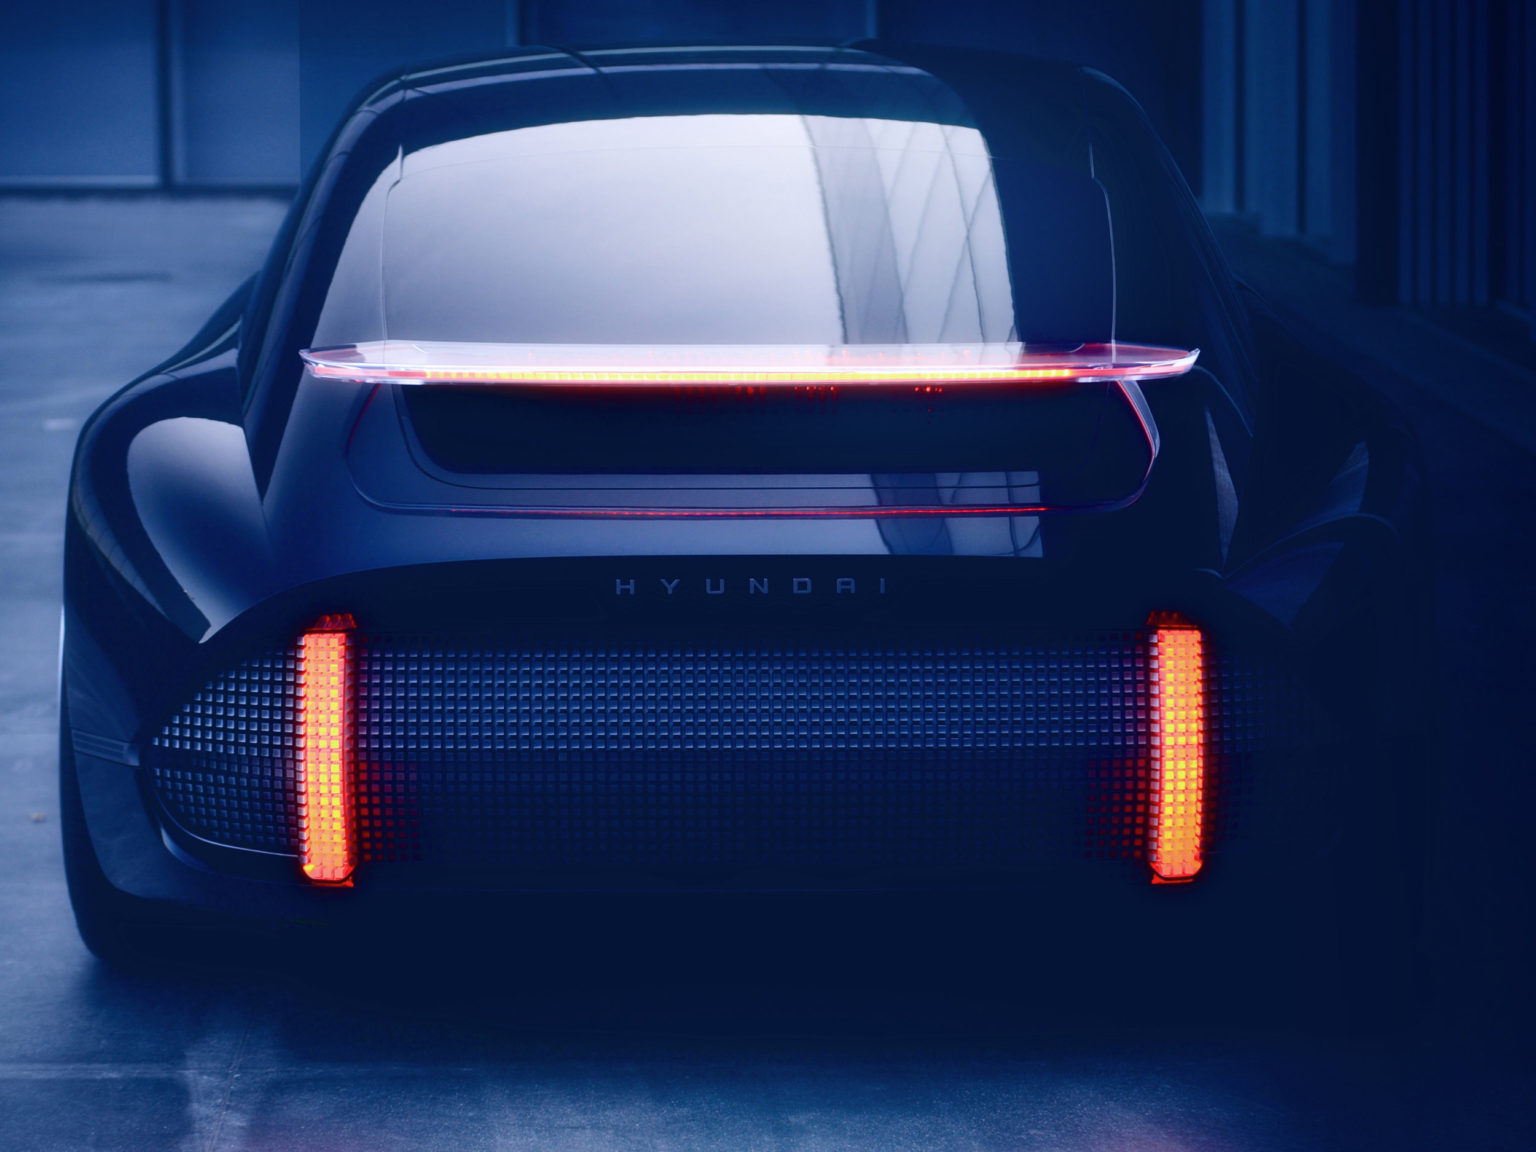 Hyundai is using this new concept car to showcase its future electric vehicle plans.